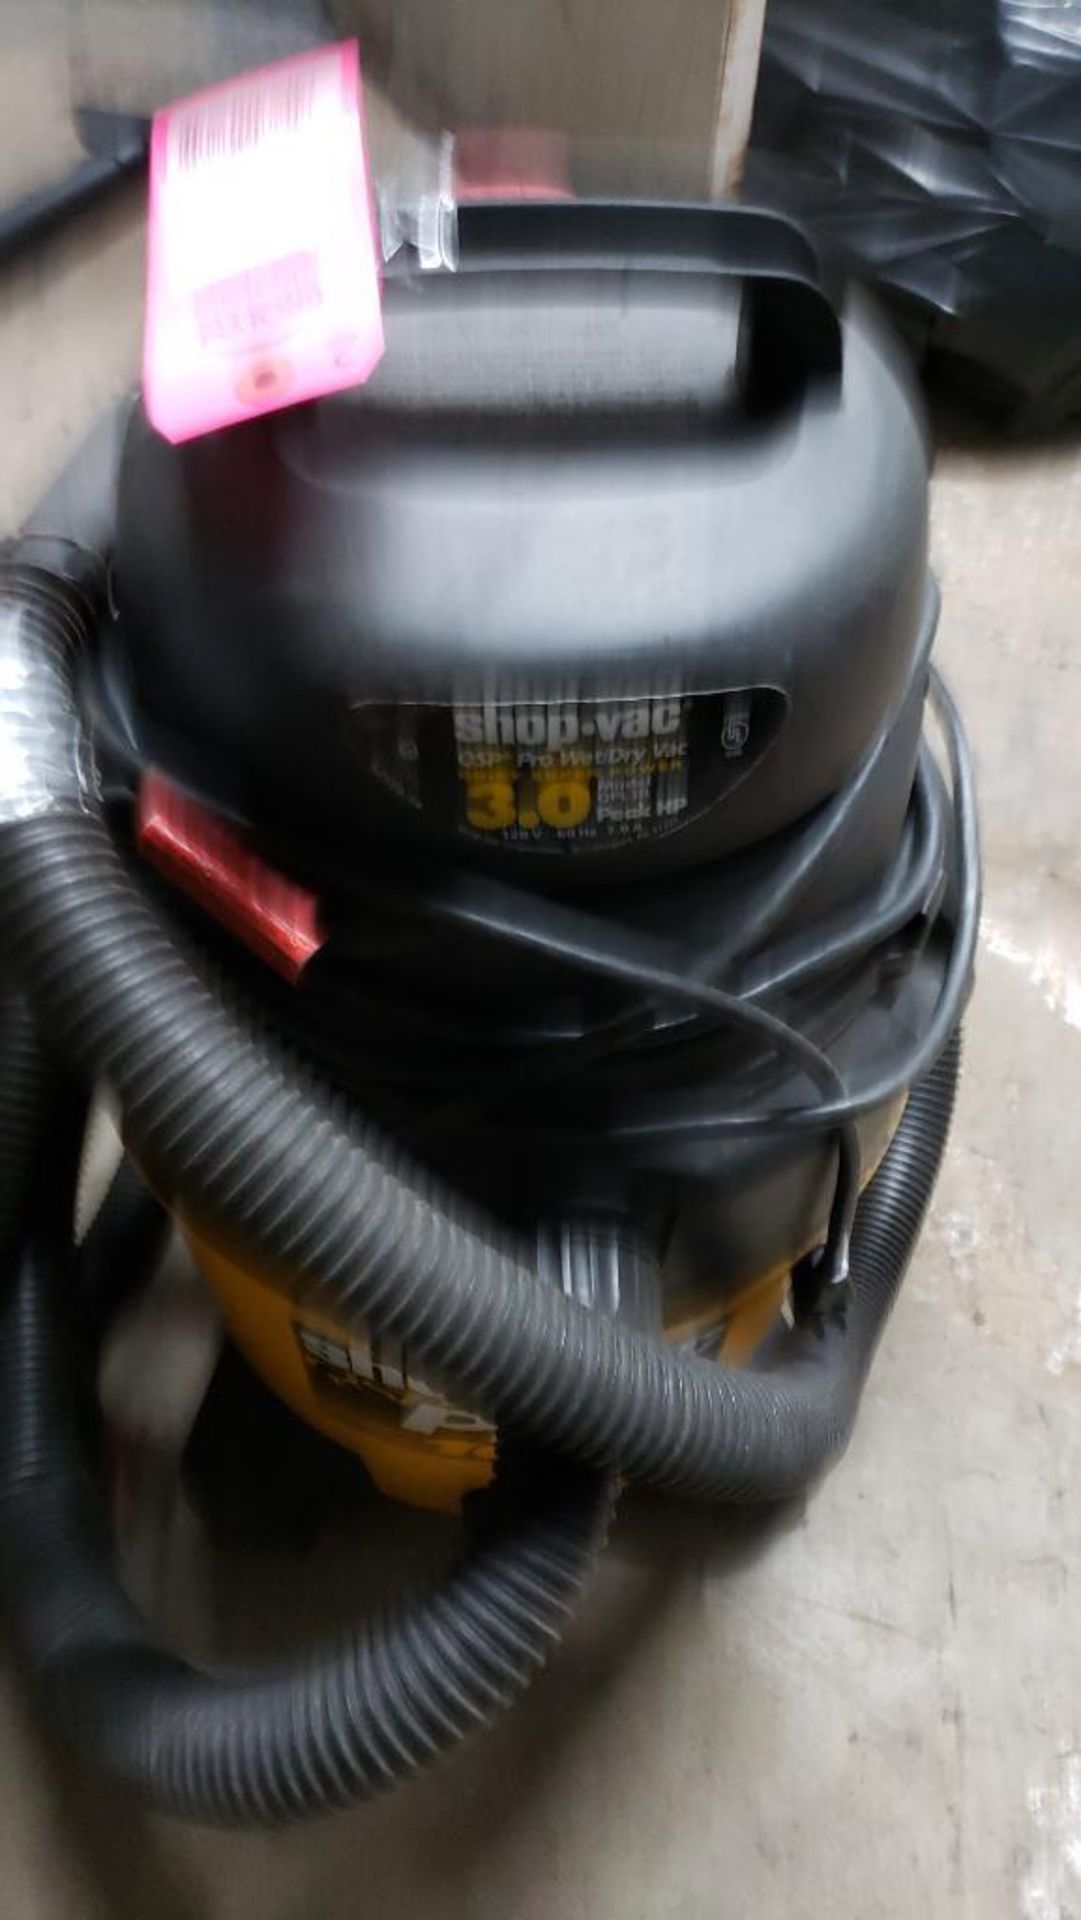 Qty 2 - Shop Vac. One 4.0hp, 10 gallon, one unmarked. - Image 4 of 4